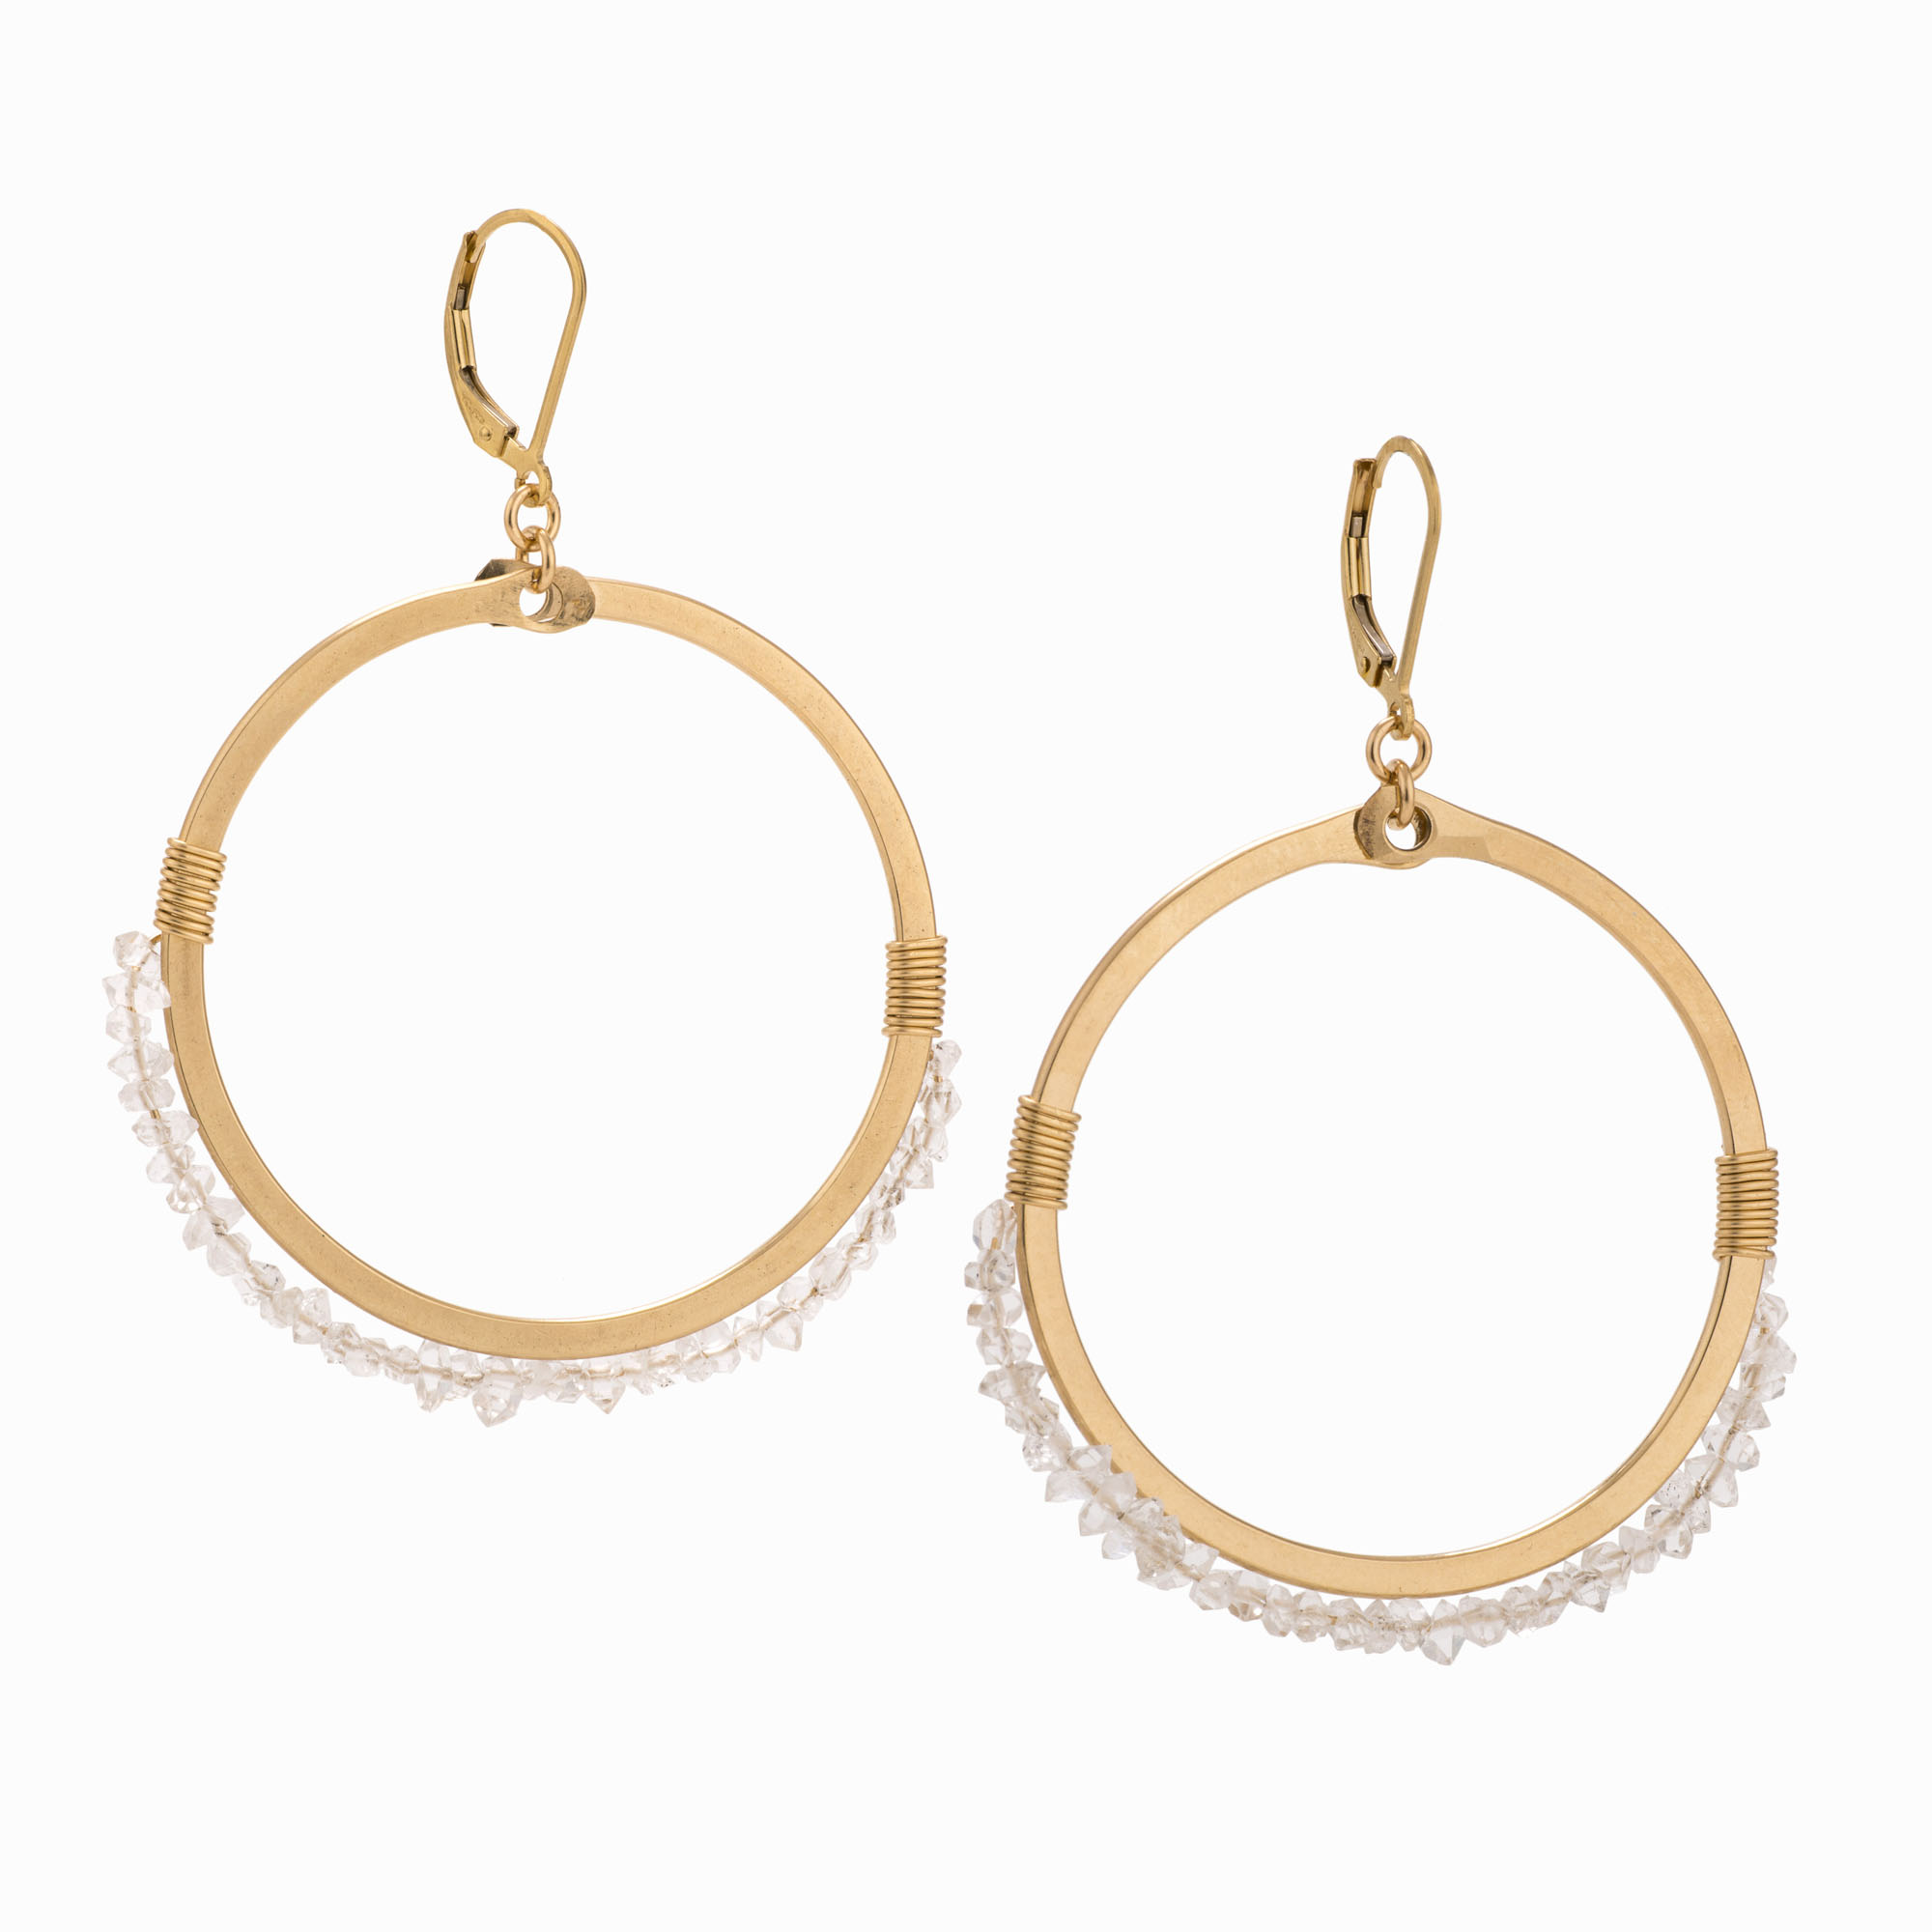 Featured image for “Lynx Gold Hoop Earrings”